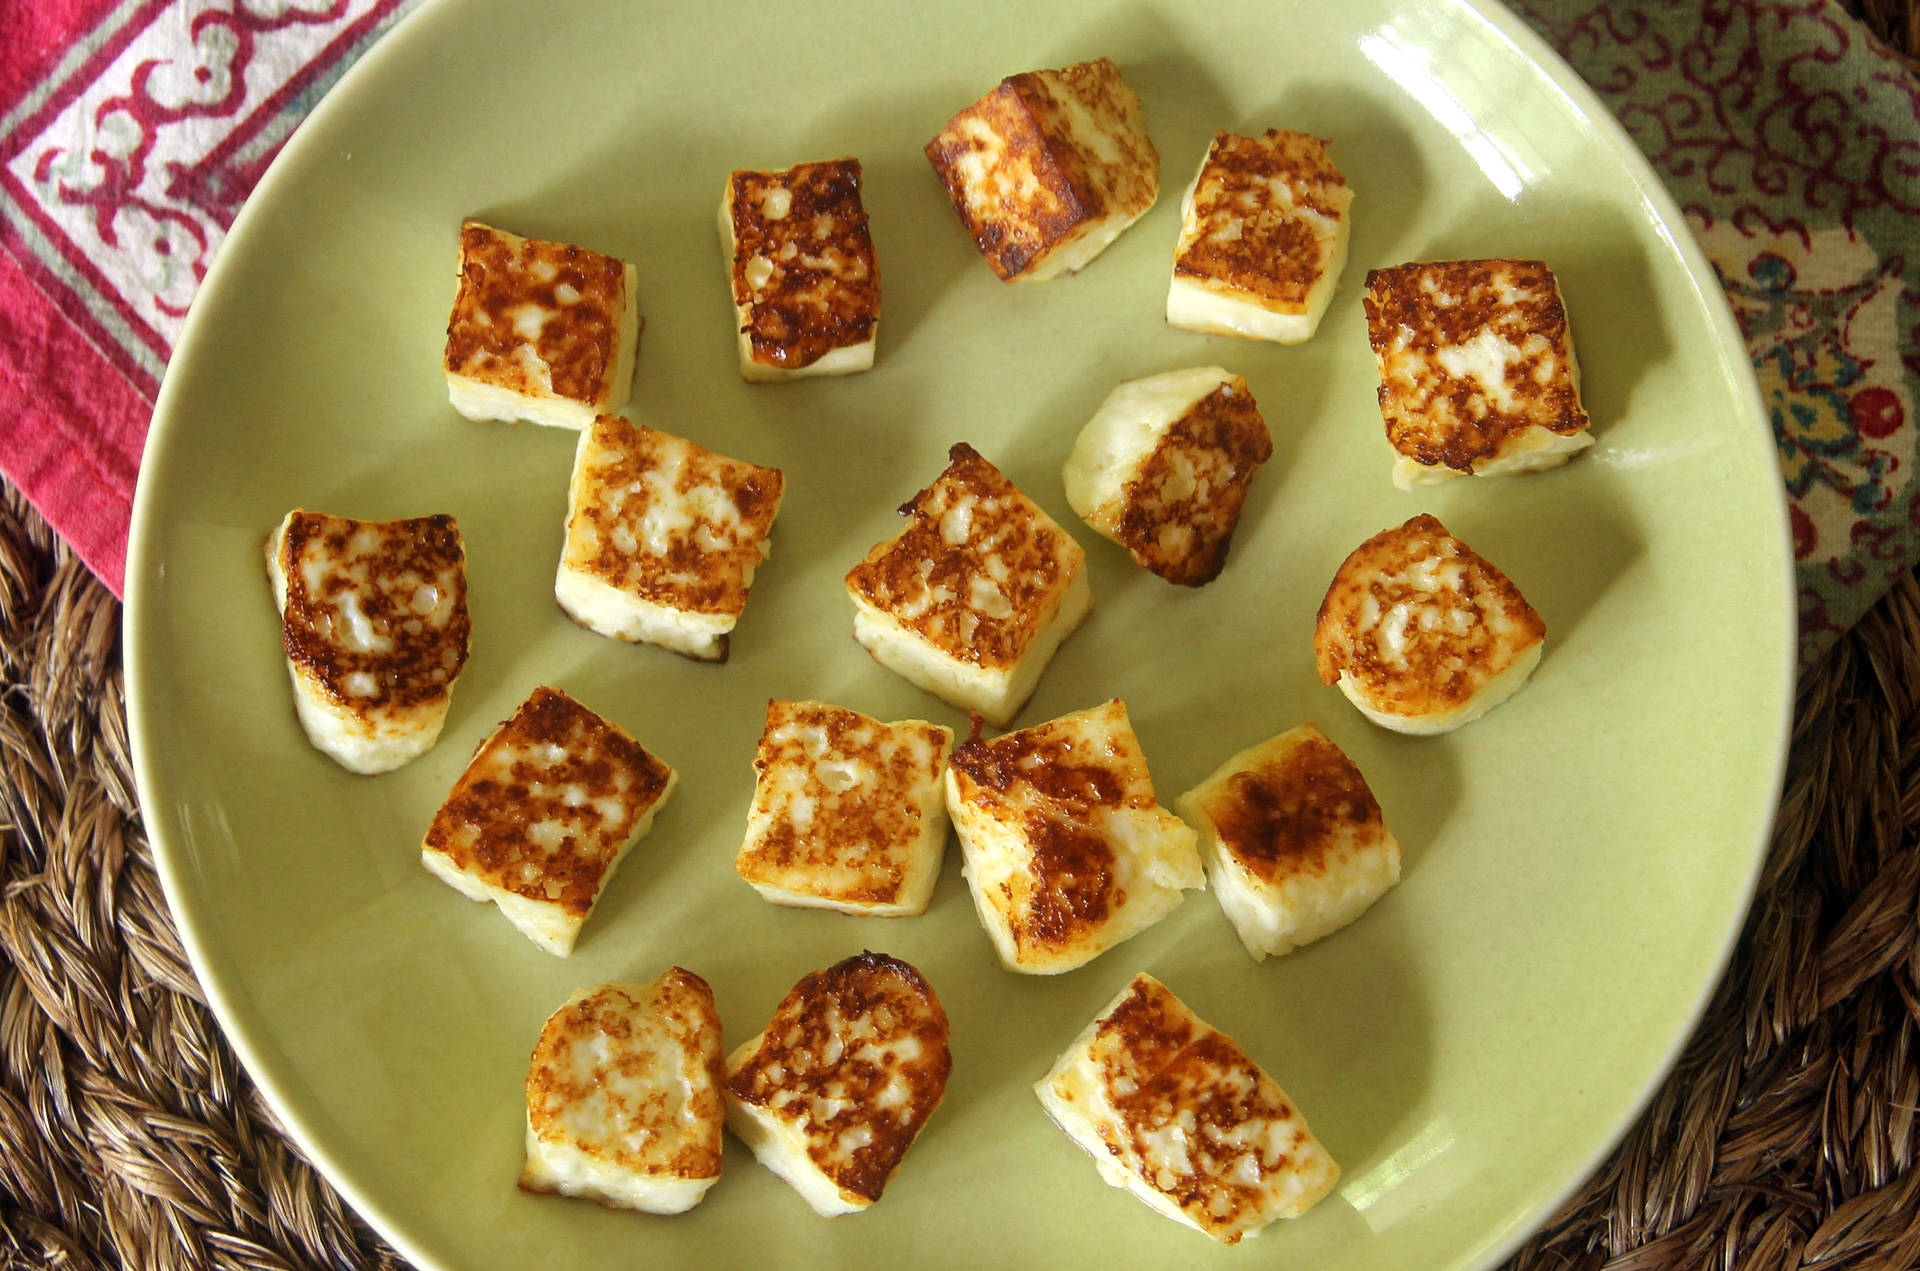 Homemade paneer, seared in olive oil. Kate Williams